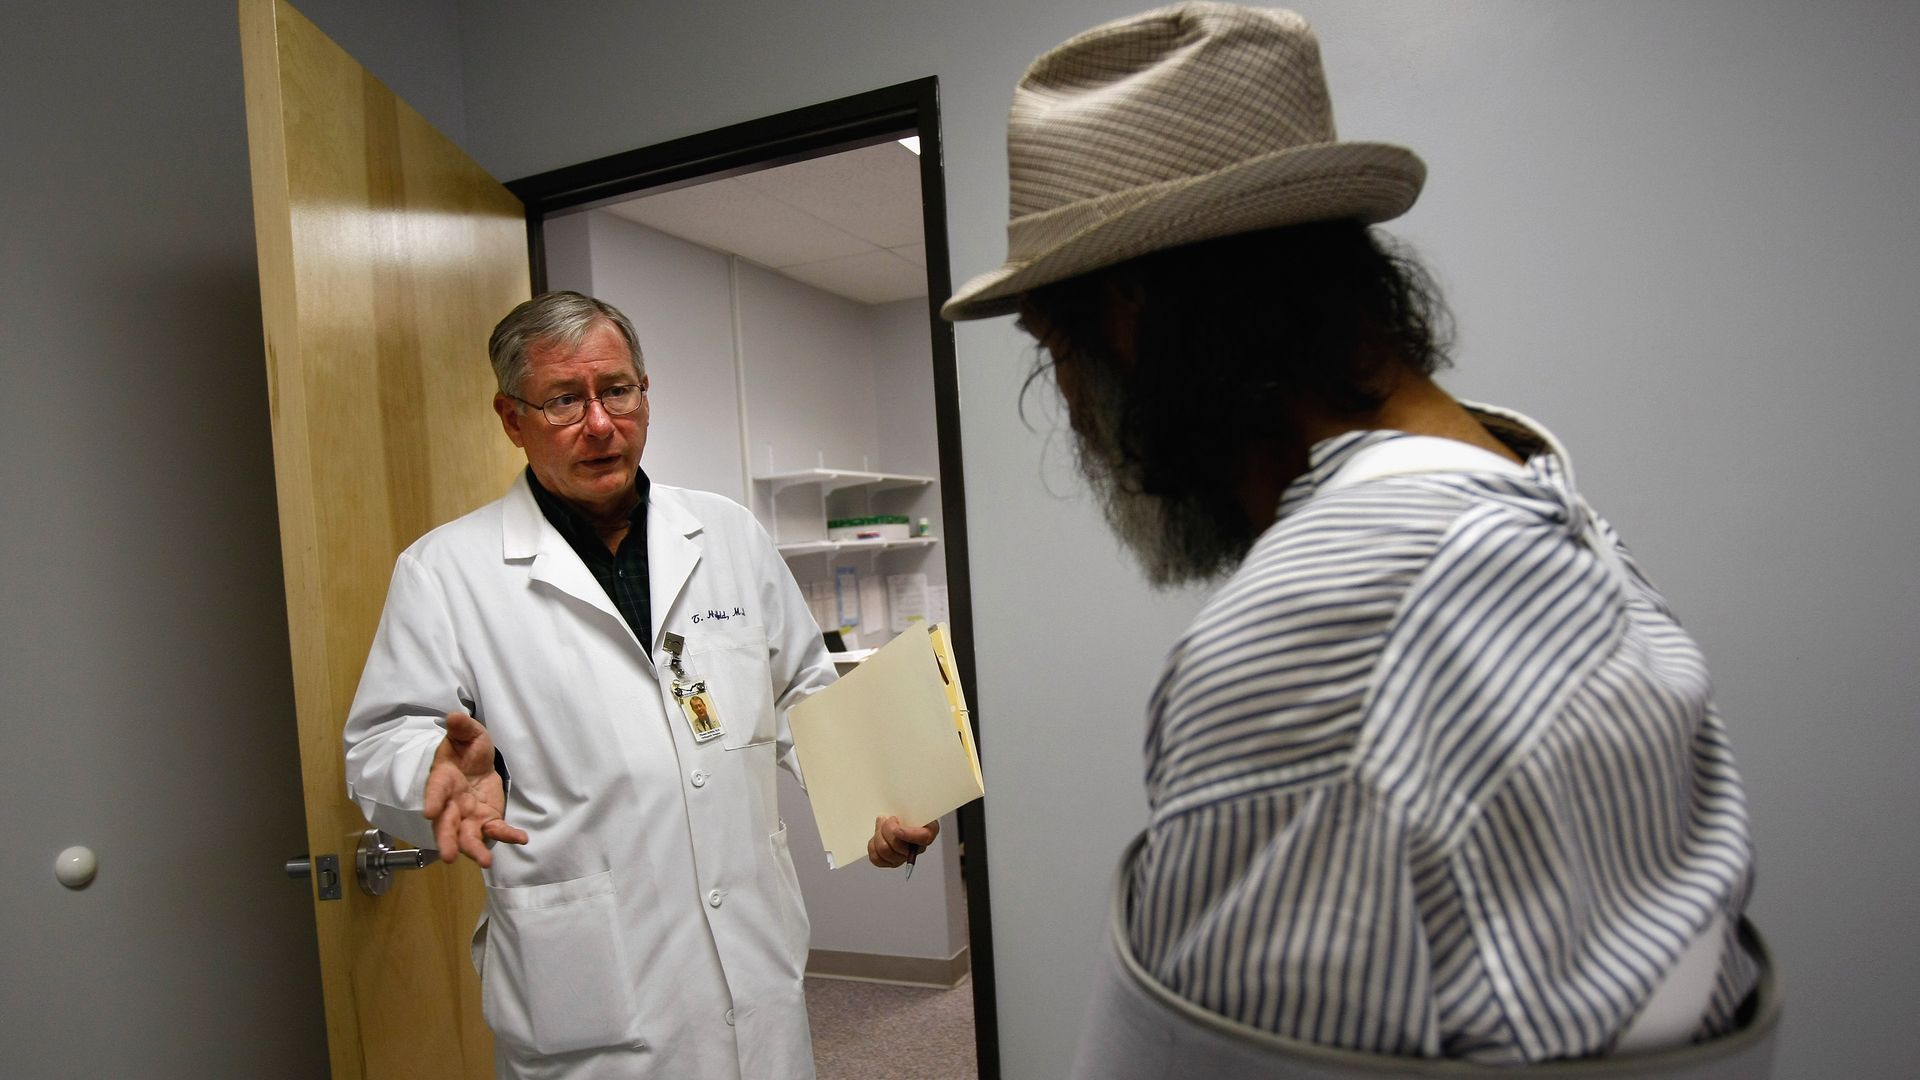 A doctor speaks with a Medicaid patient in a clinic.